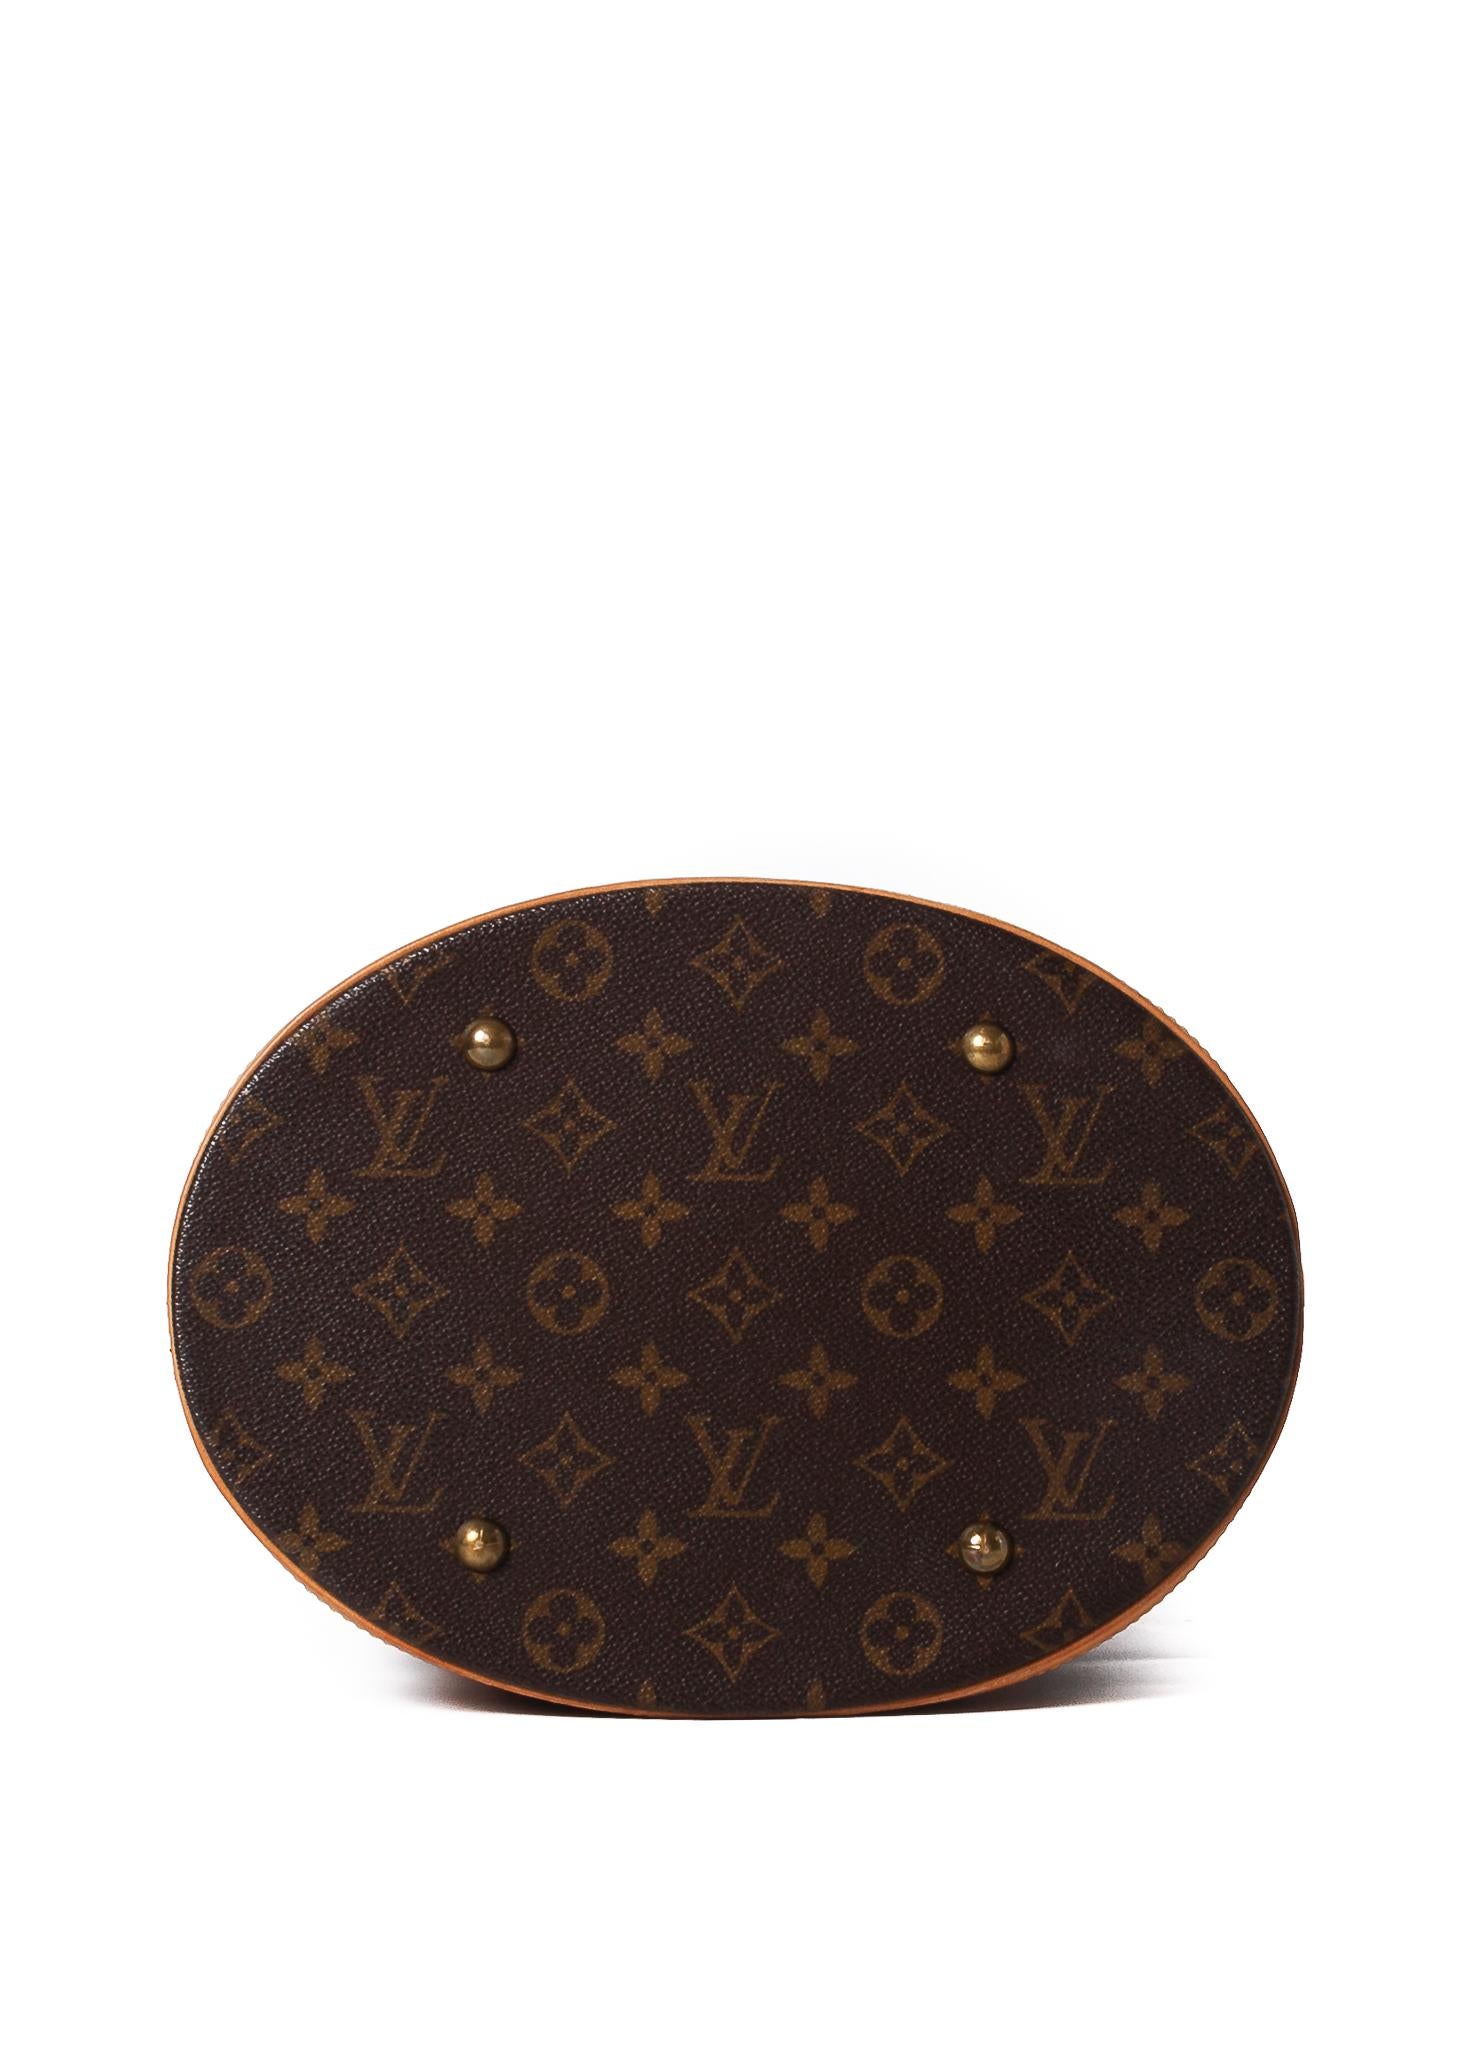 This vintage bag features LV monogram pattern on brown canvas, leather finishes with beautifully aged caramel patina, gold-tone hardware, an open top, flat top handles, an internal zip pocket and a coated canvas interior lining. 

COLOR: